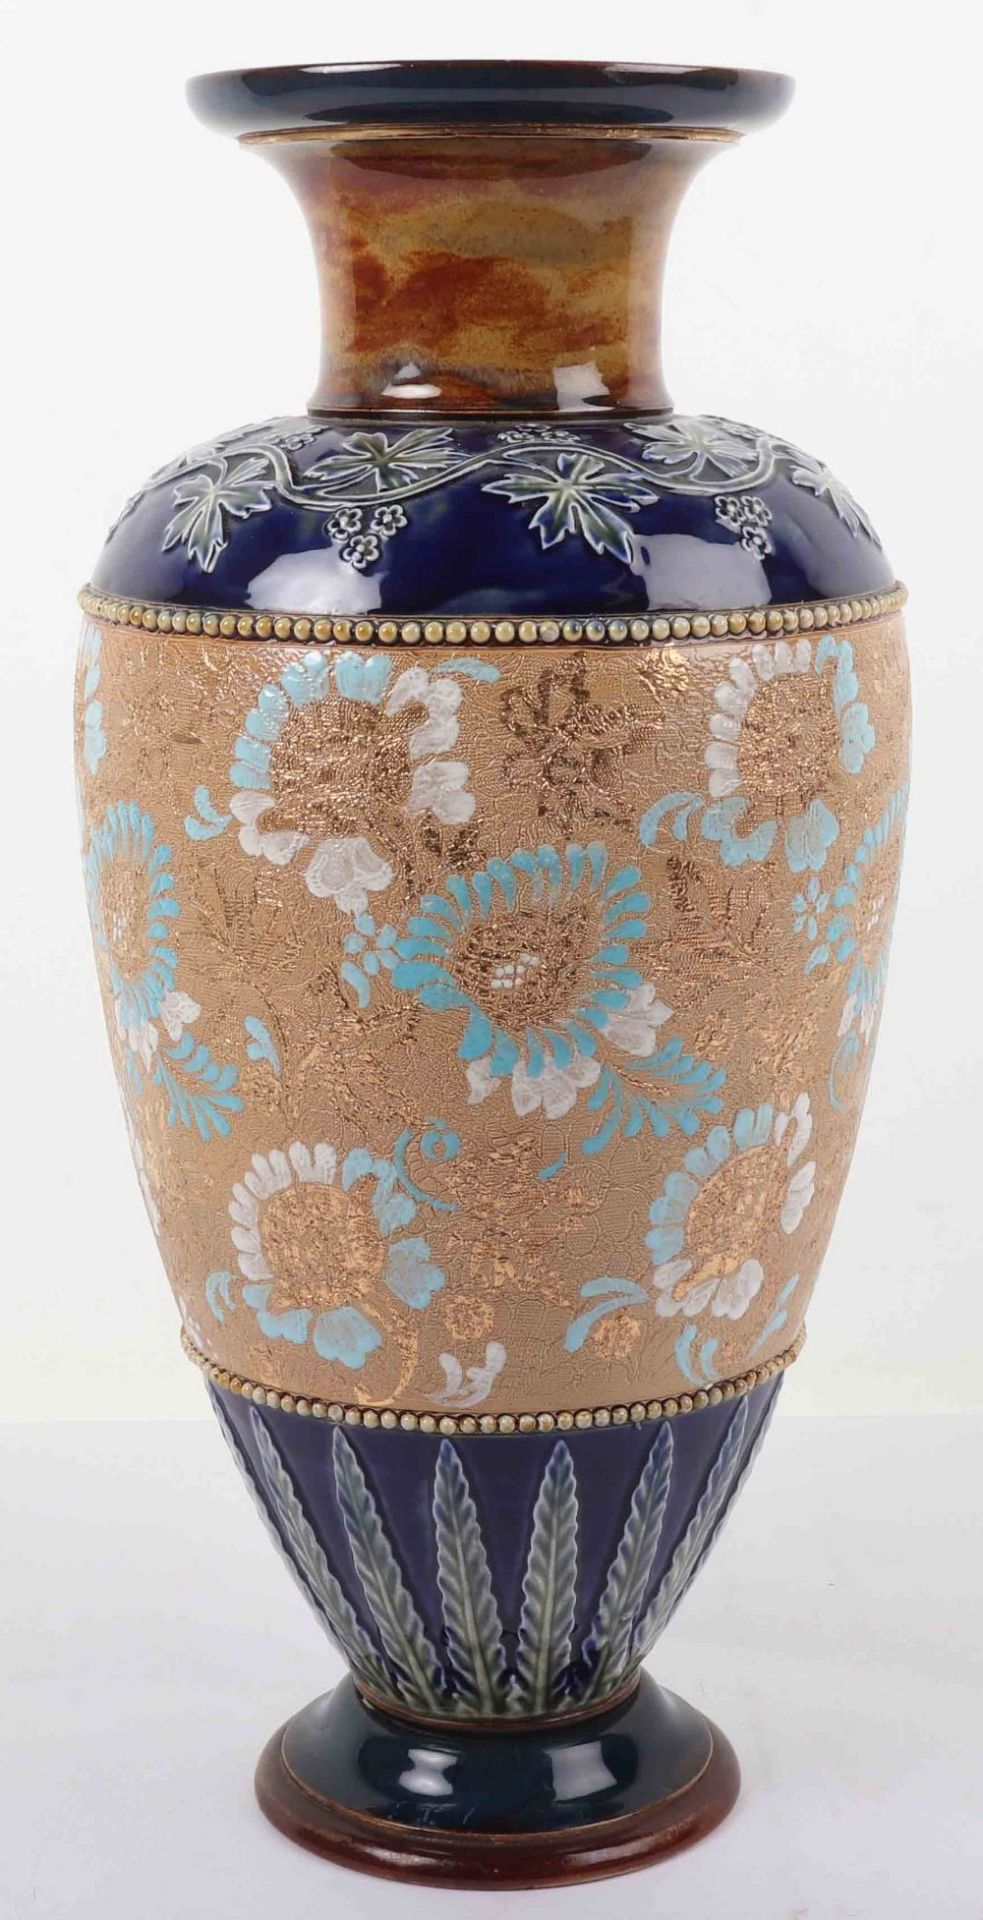 A Royal Doulton Slaters Patent vase - Image 4 of 10